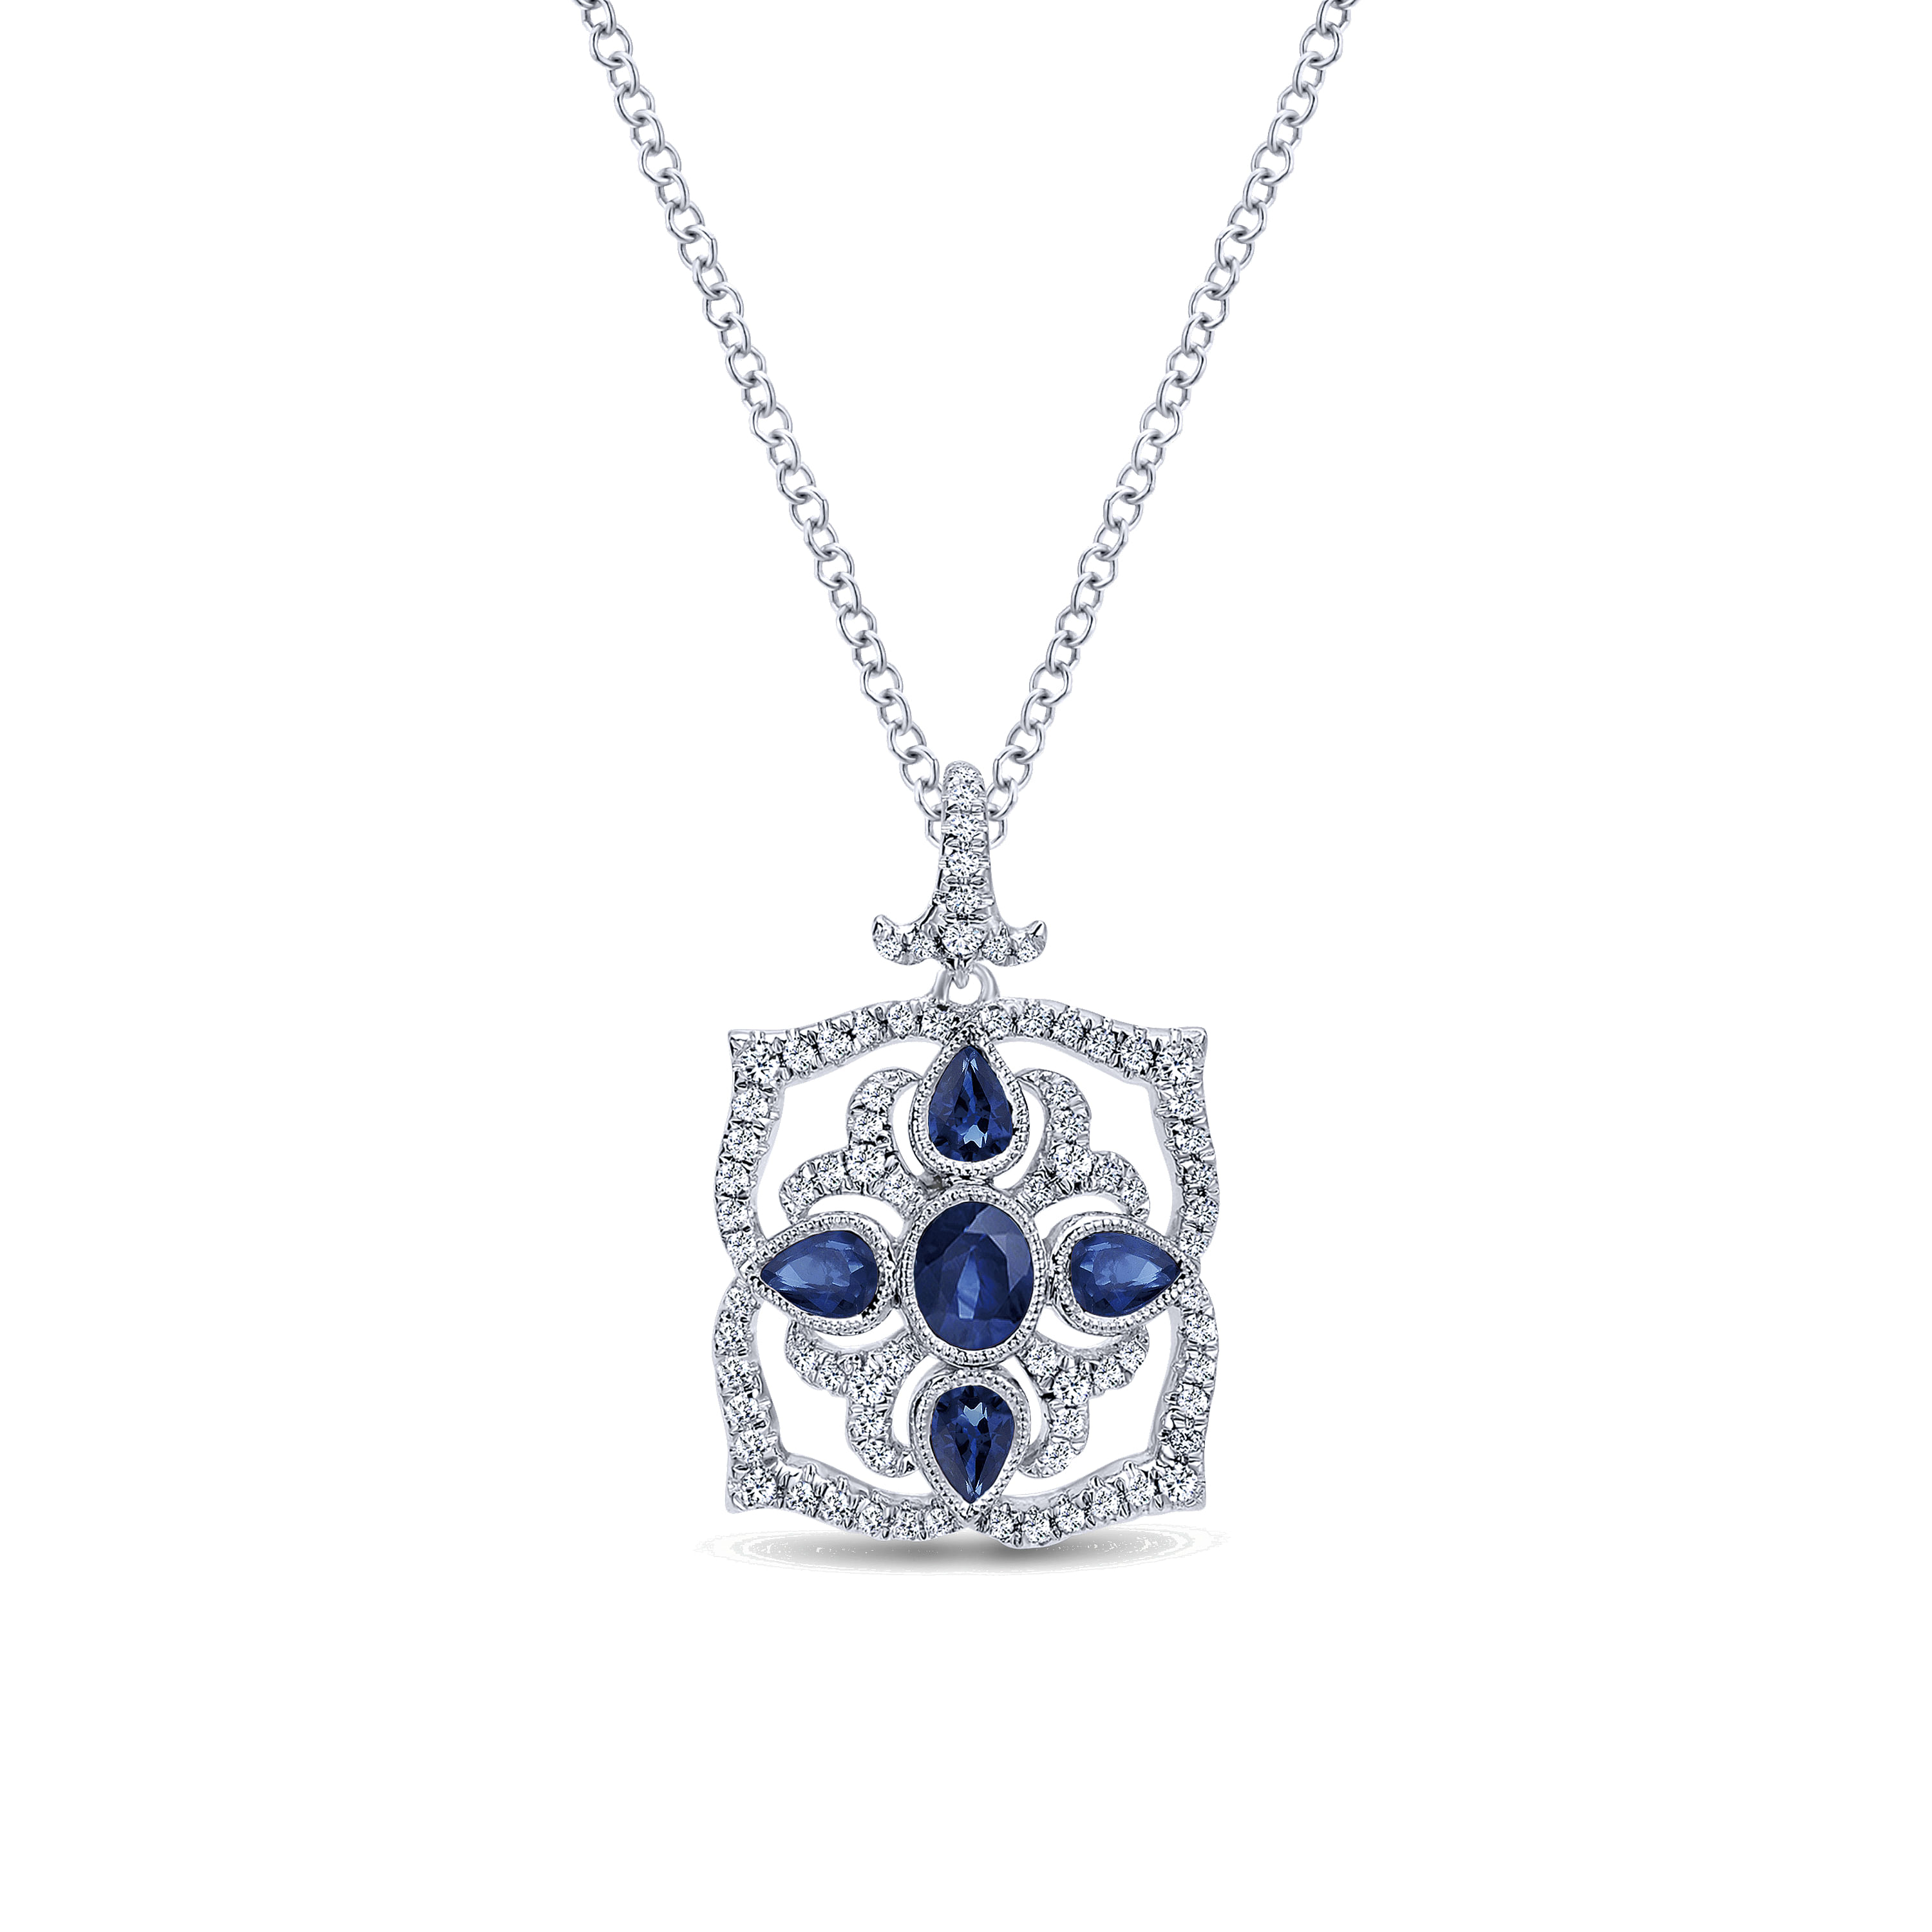 Gabriel - Vintage Inspired 14K White Gold Sapphire and Diamond Pendant Necklace